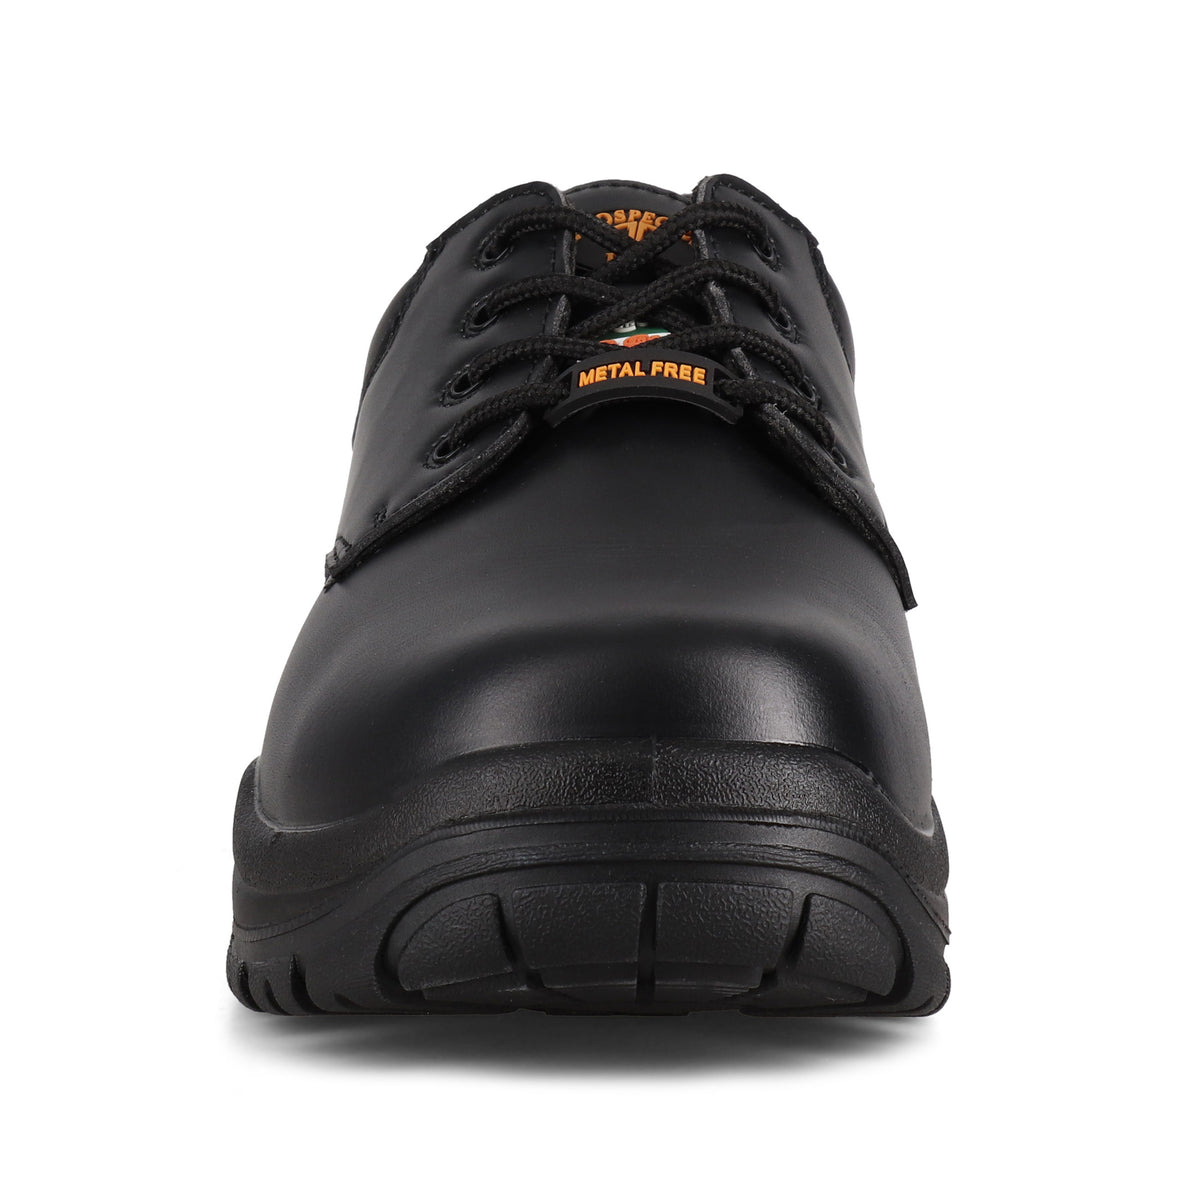 Prospector Work Boots Panther Black Shoes